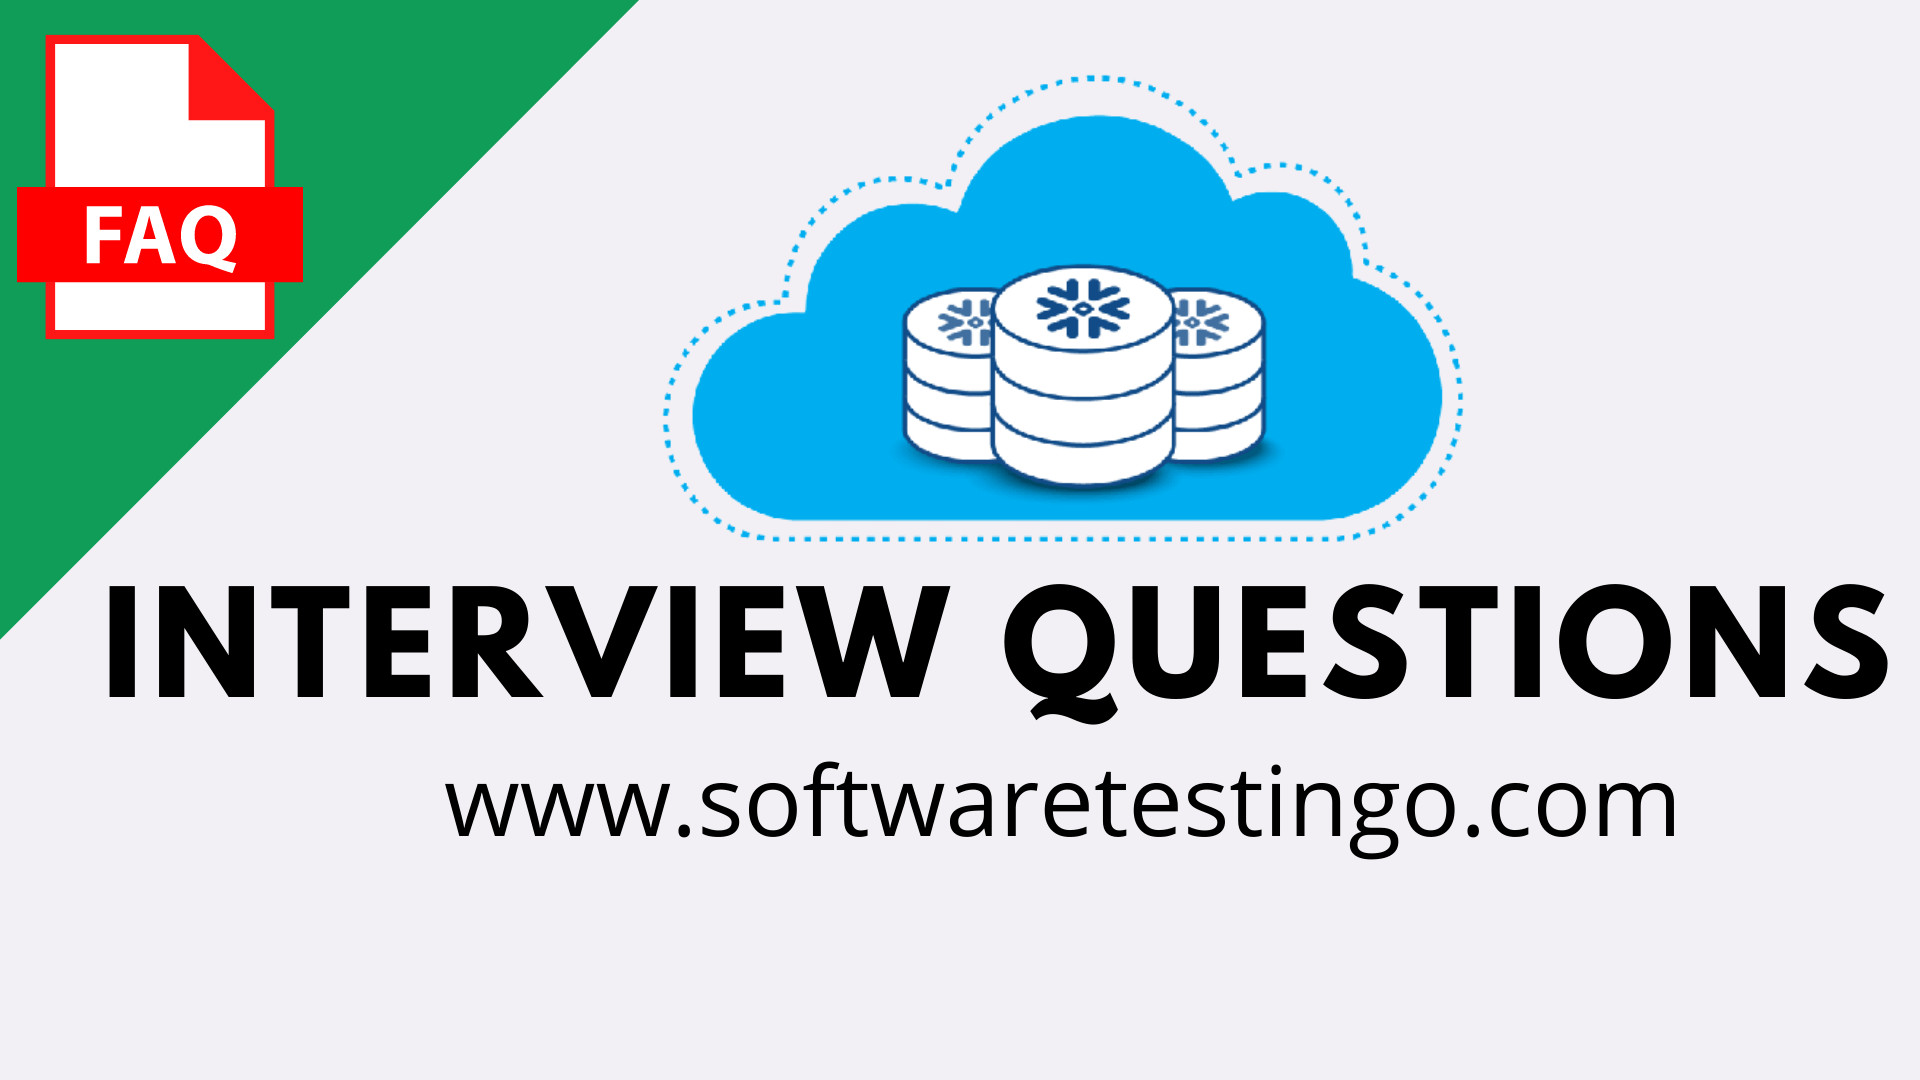 Data Warehouse Interview Questions